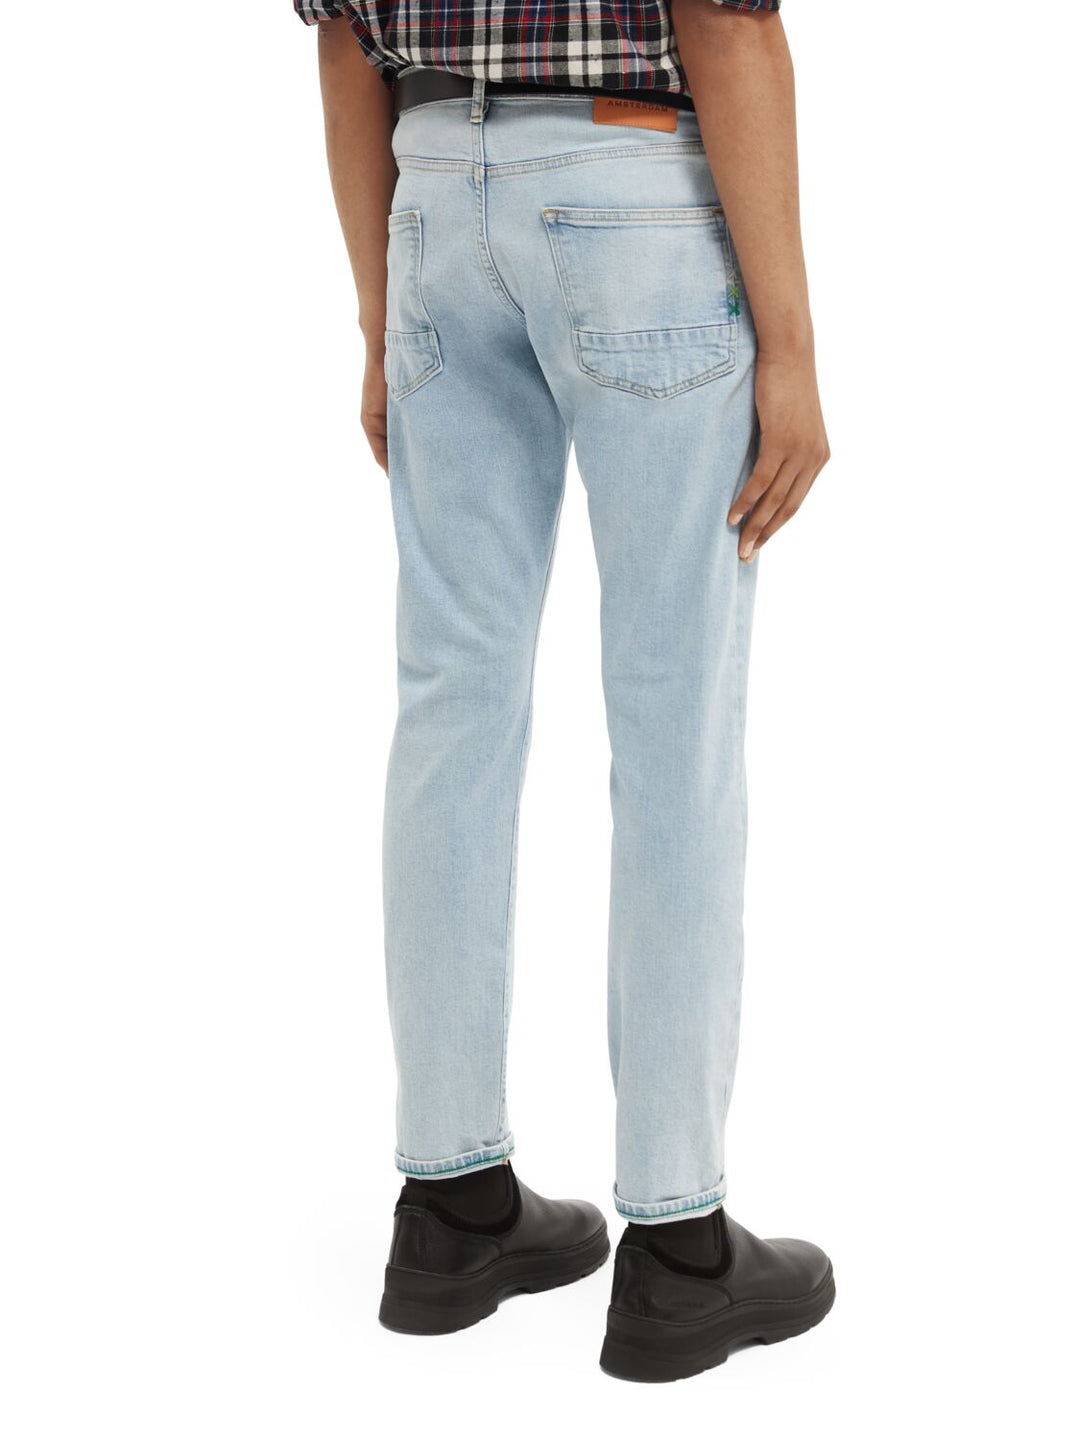 Ralston Wind Stripped Regular Fit Slim Jeans | Buster McGee